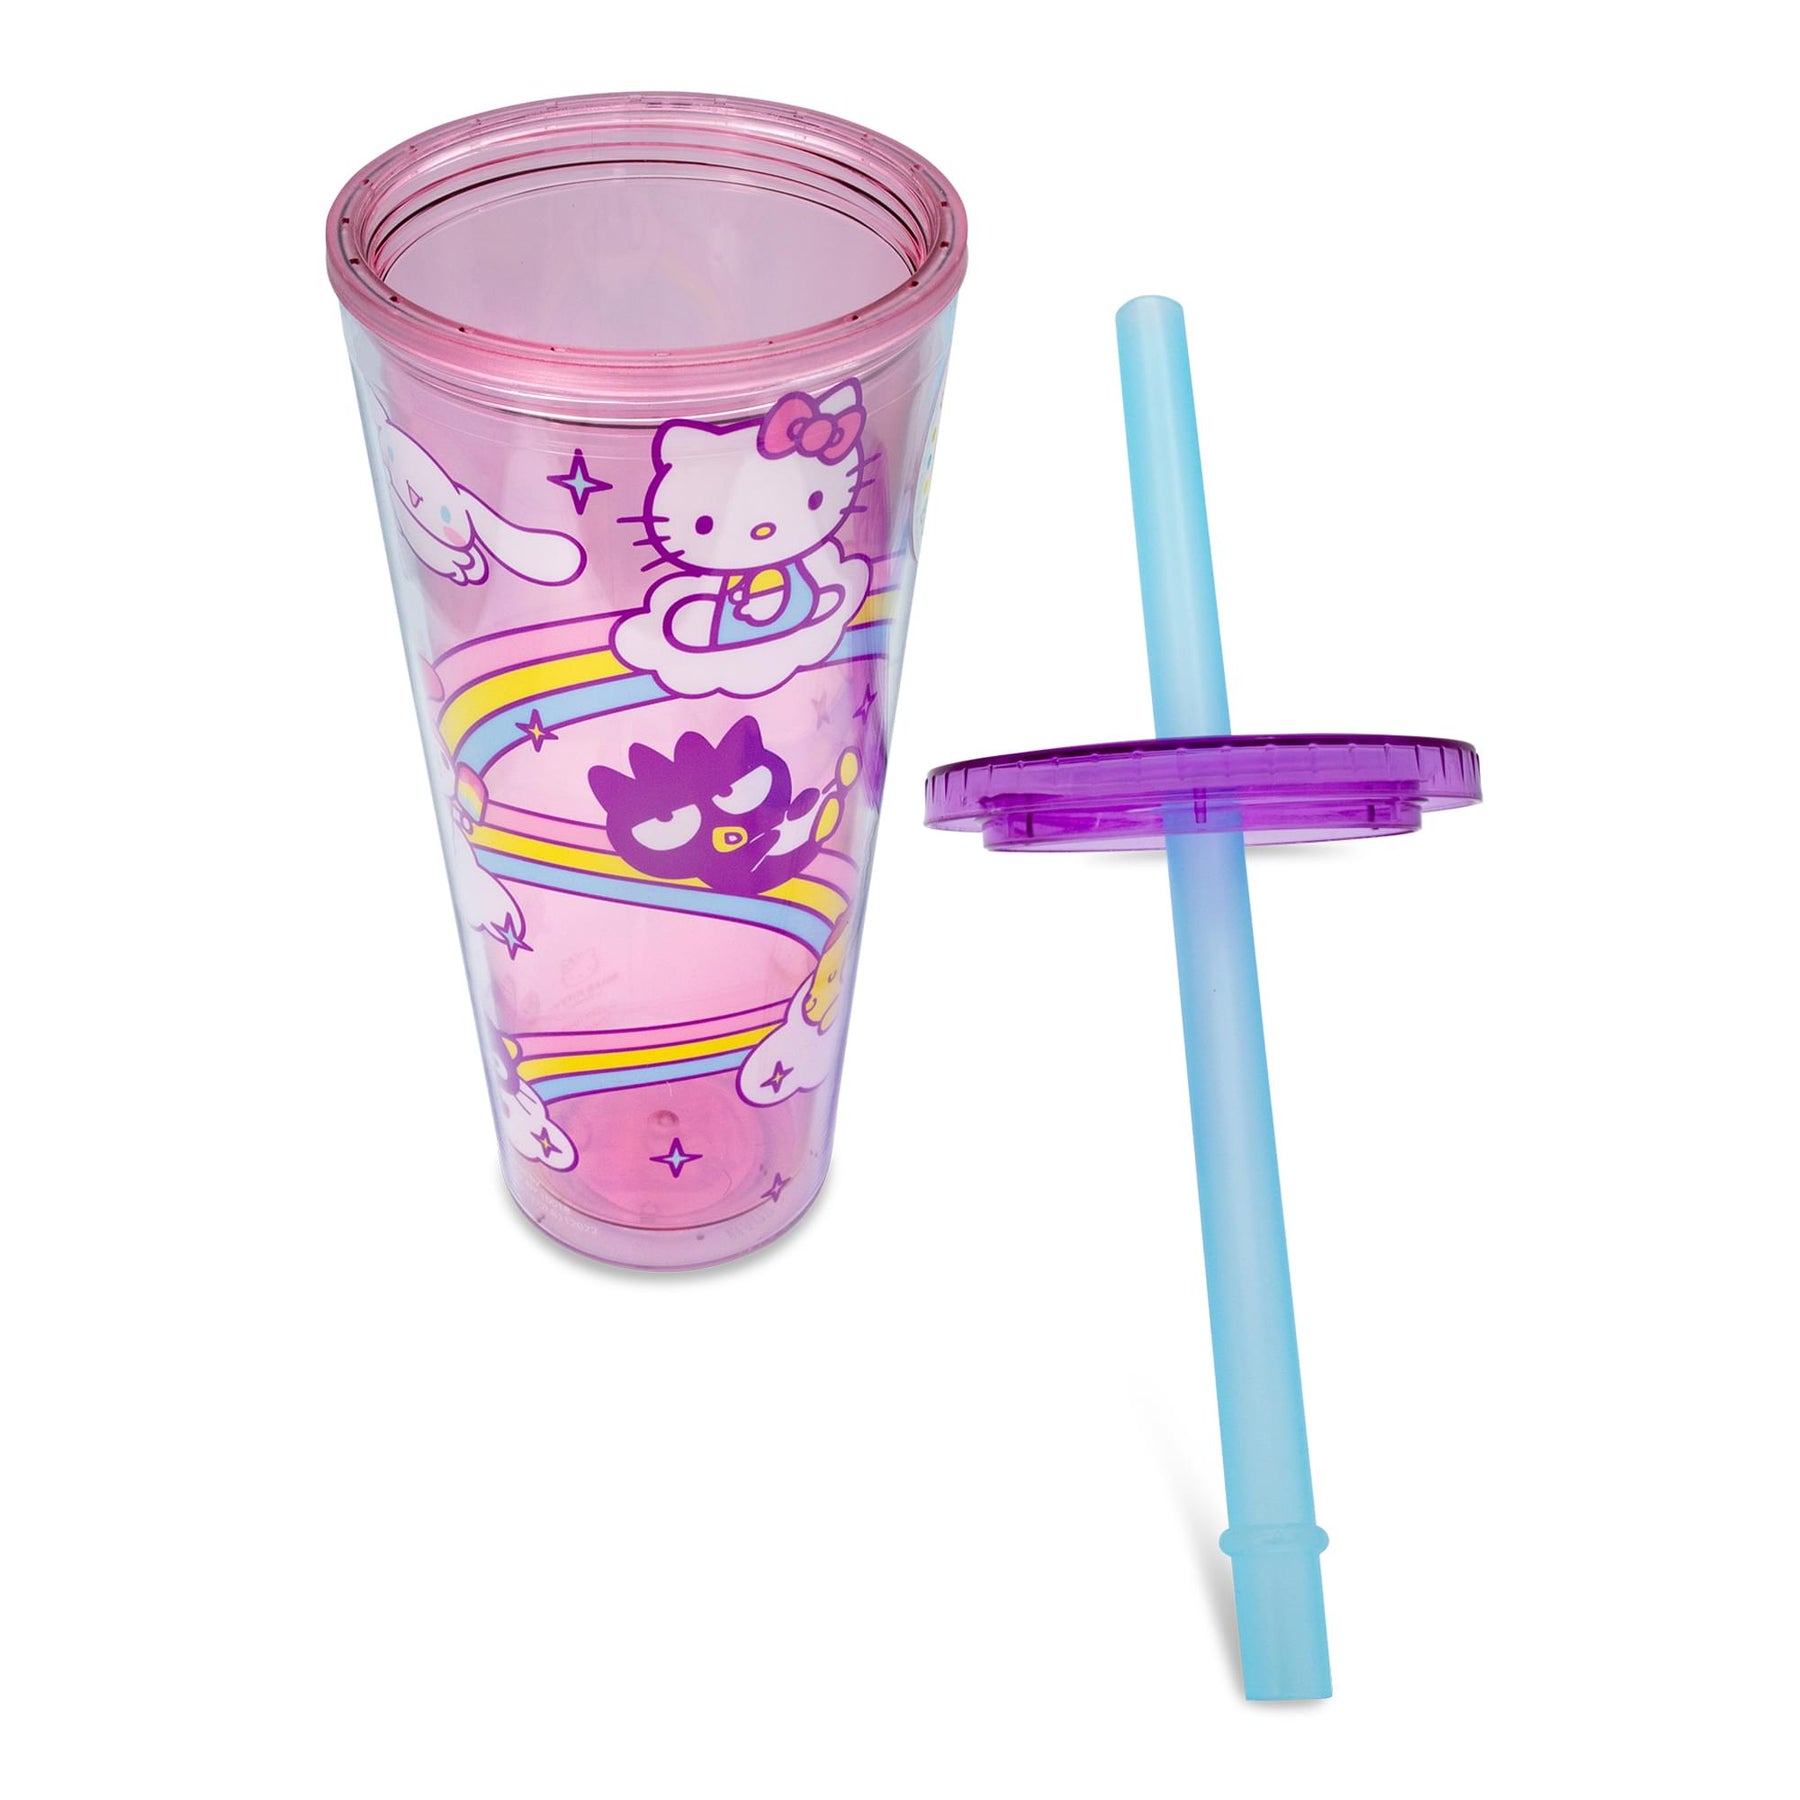 Sanrio Hello Kitty and Friends Carnival Cup With Lid and Straw | Holds 24 Ounces